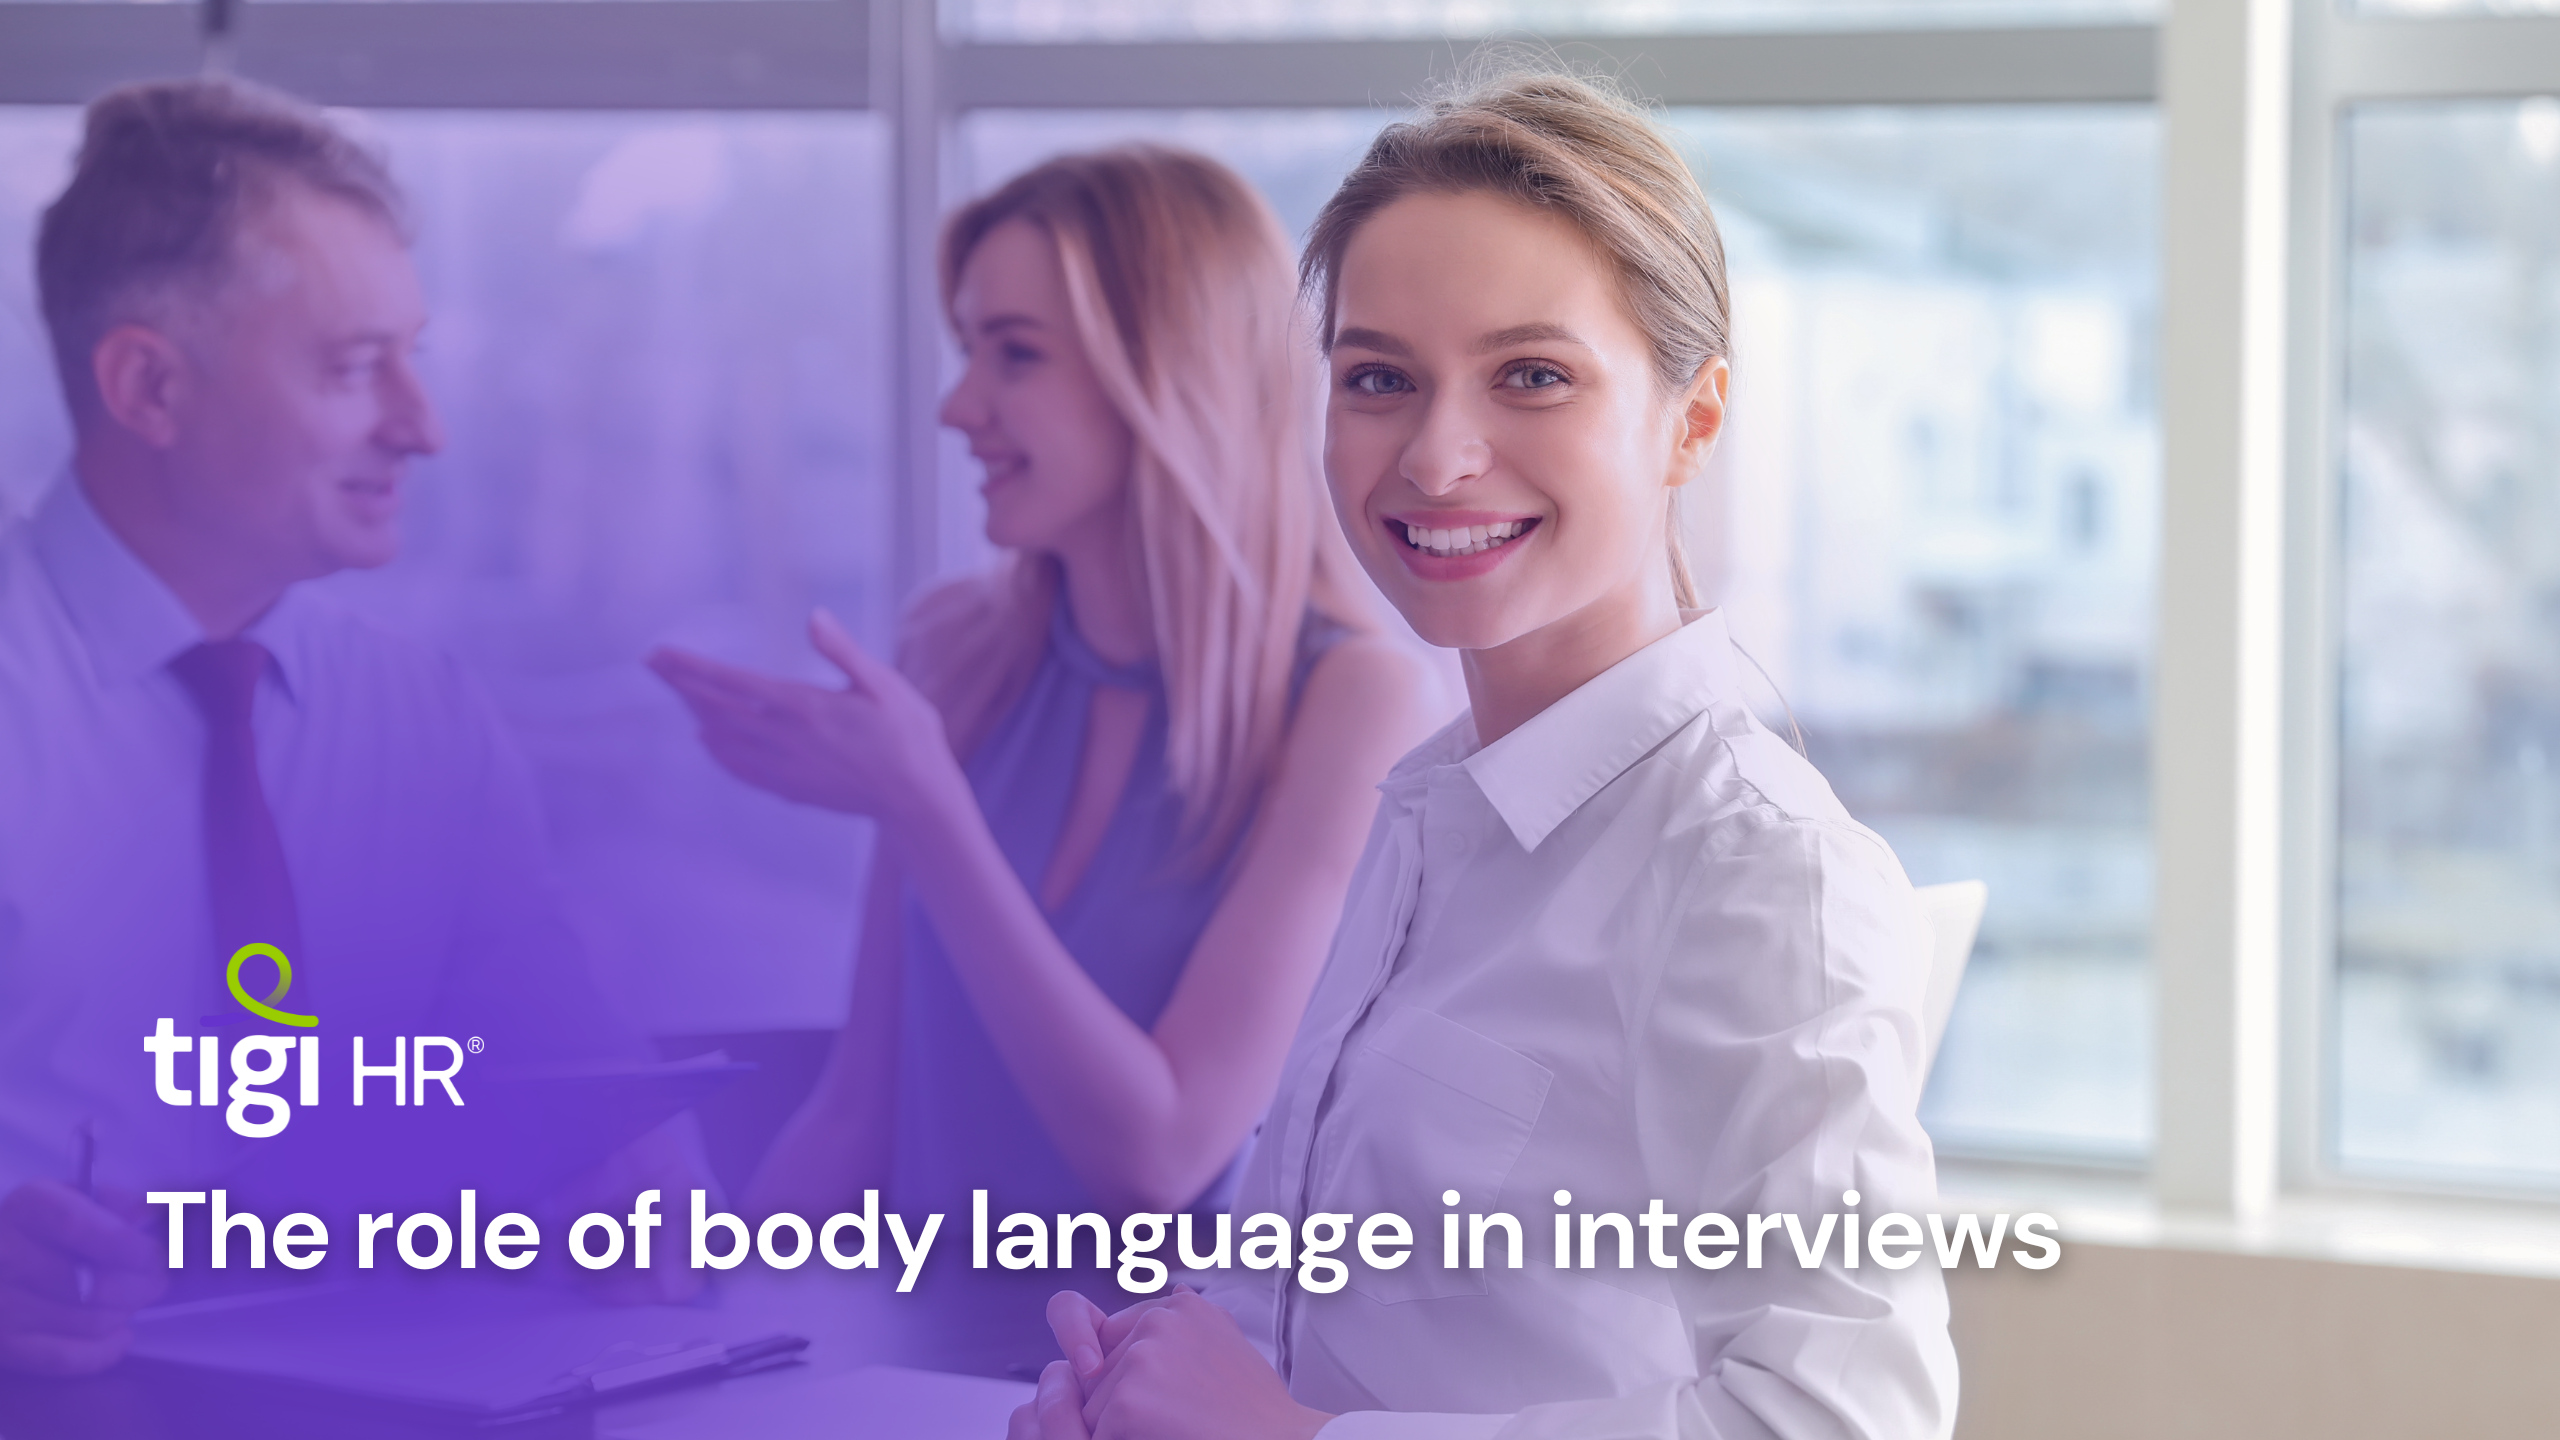 The role of body language in interviews. Find jobs at TIGI HR.